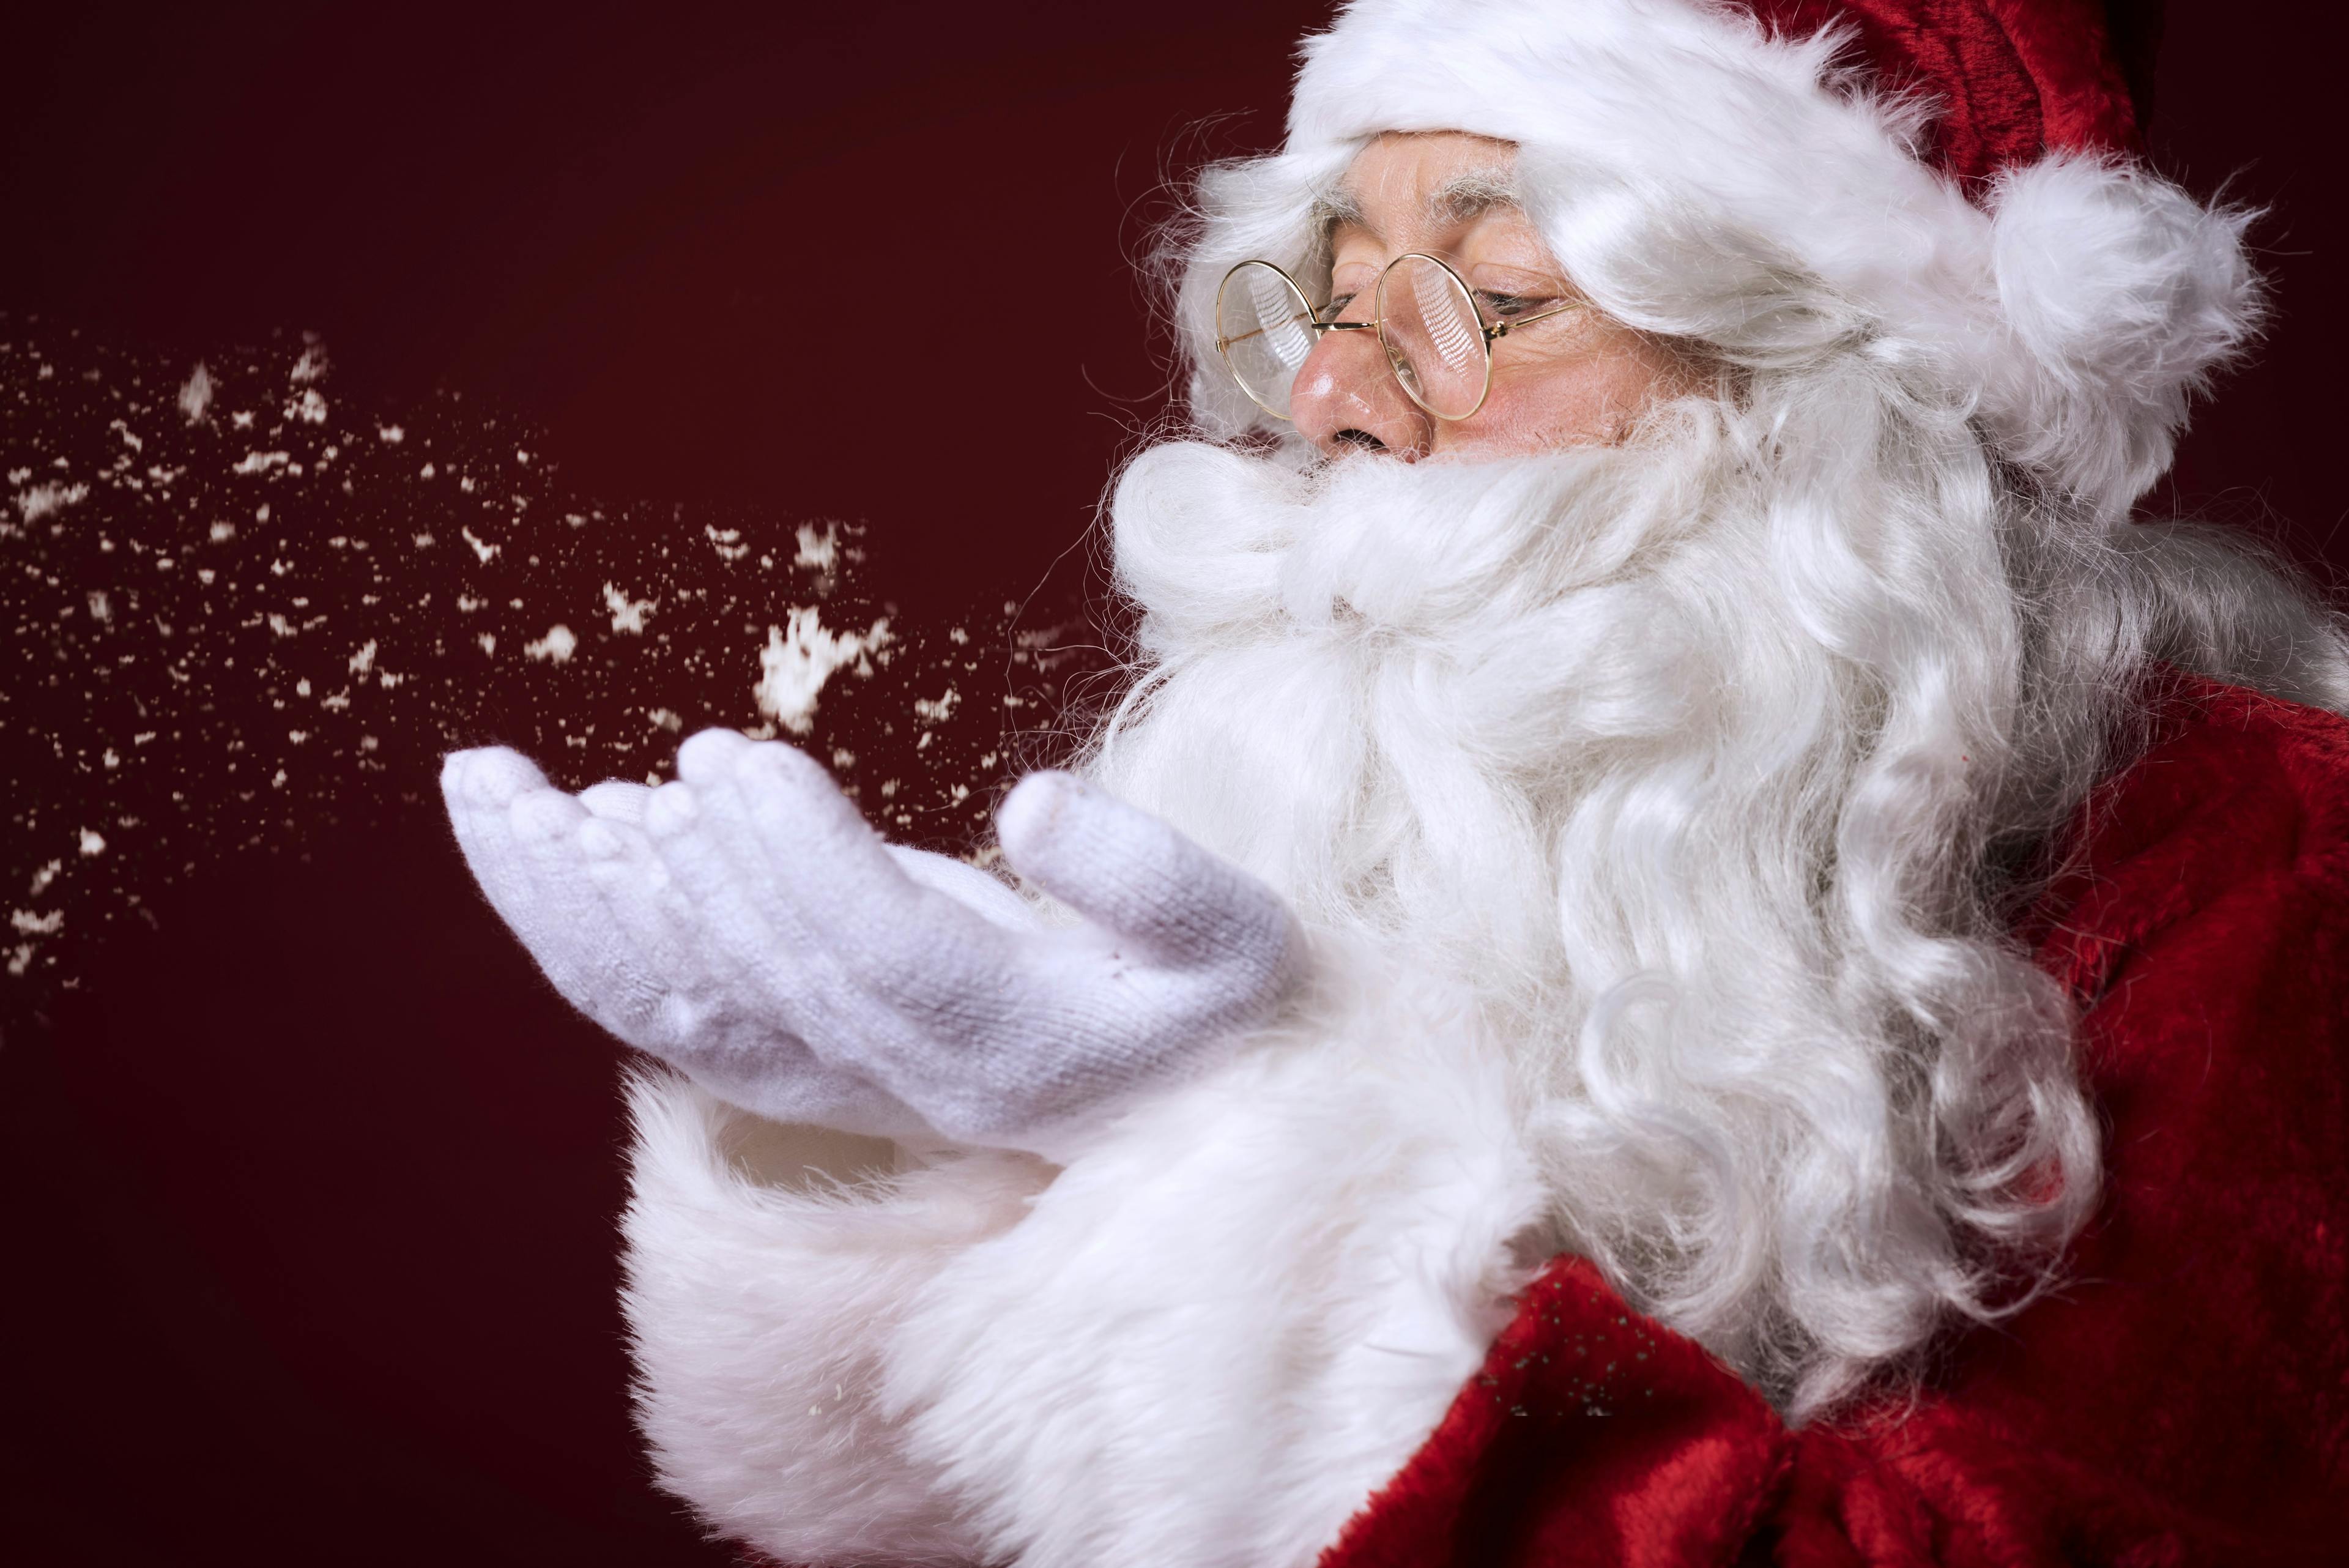 Our Favorite Portrayals of Santa Claus